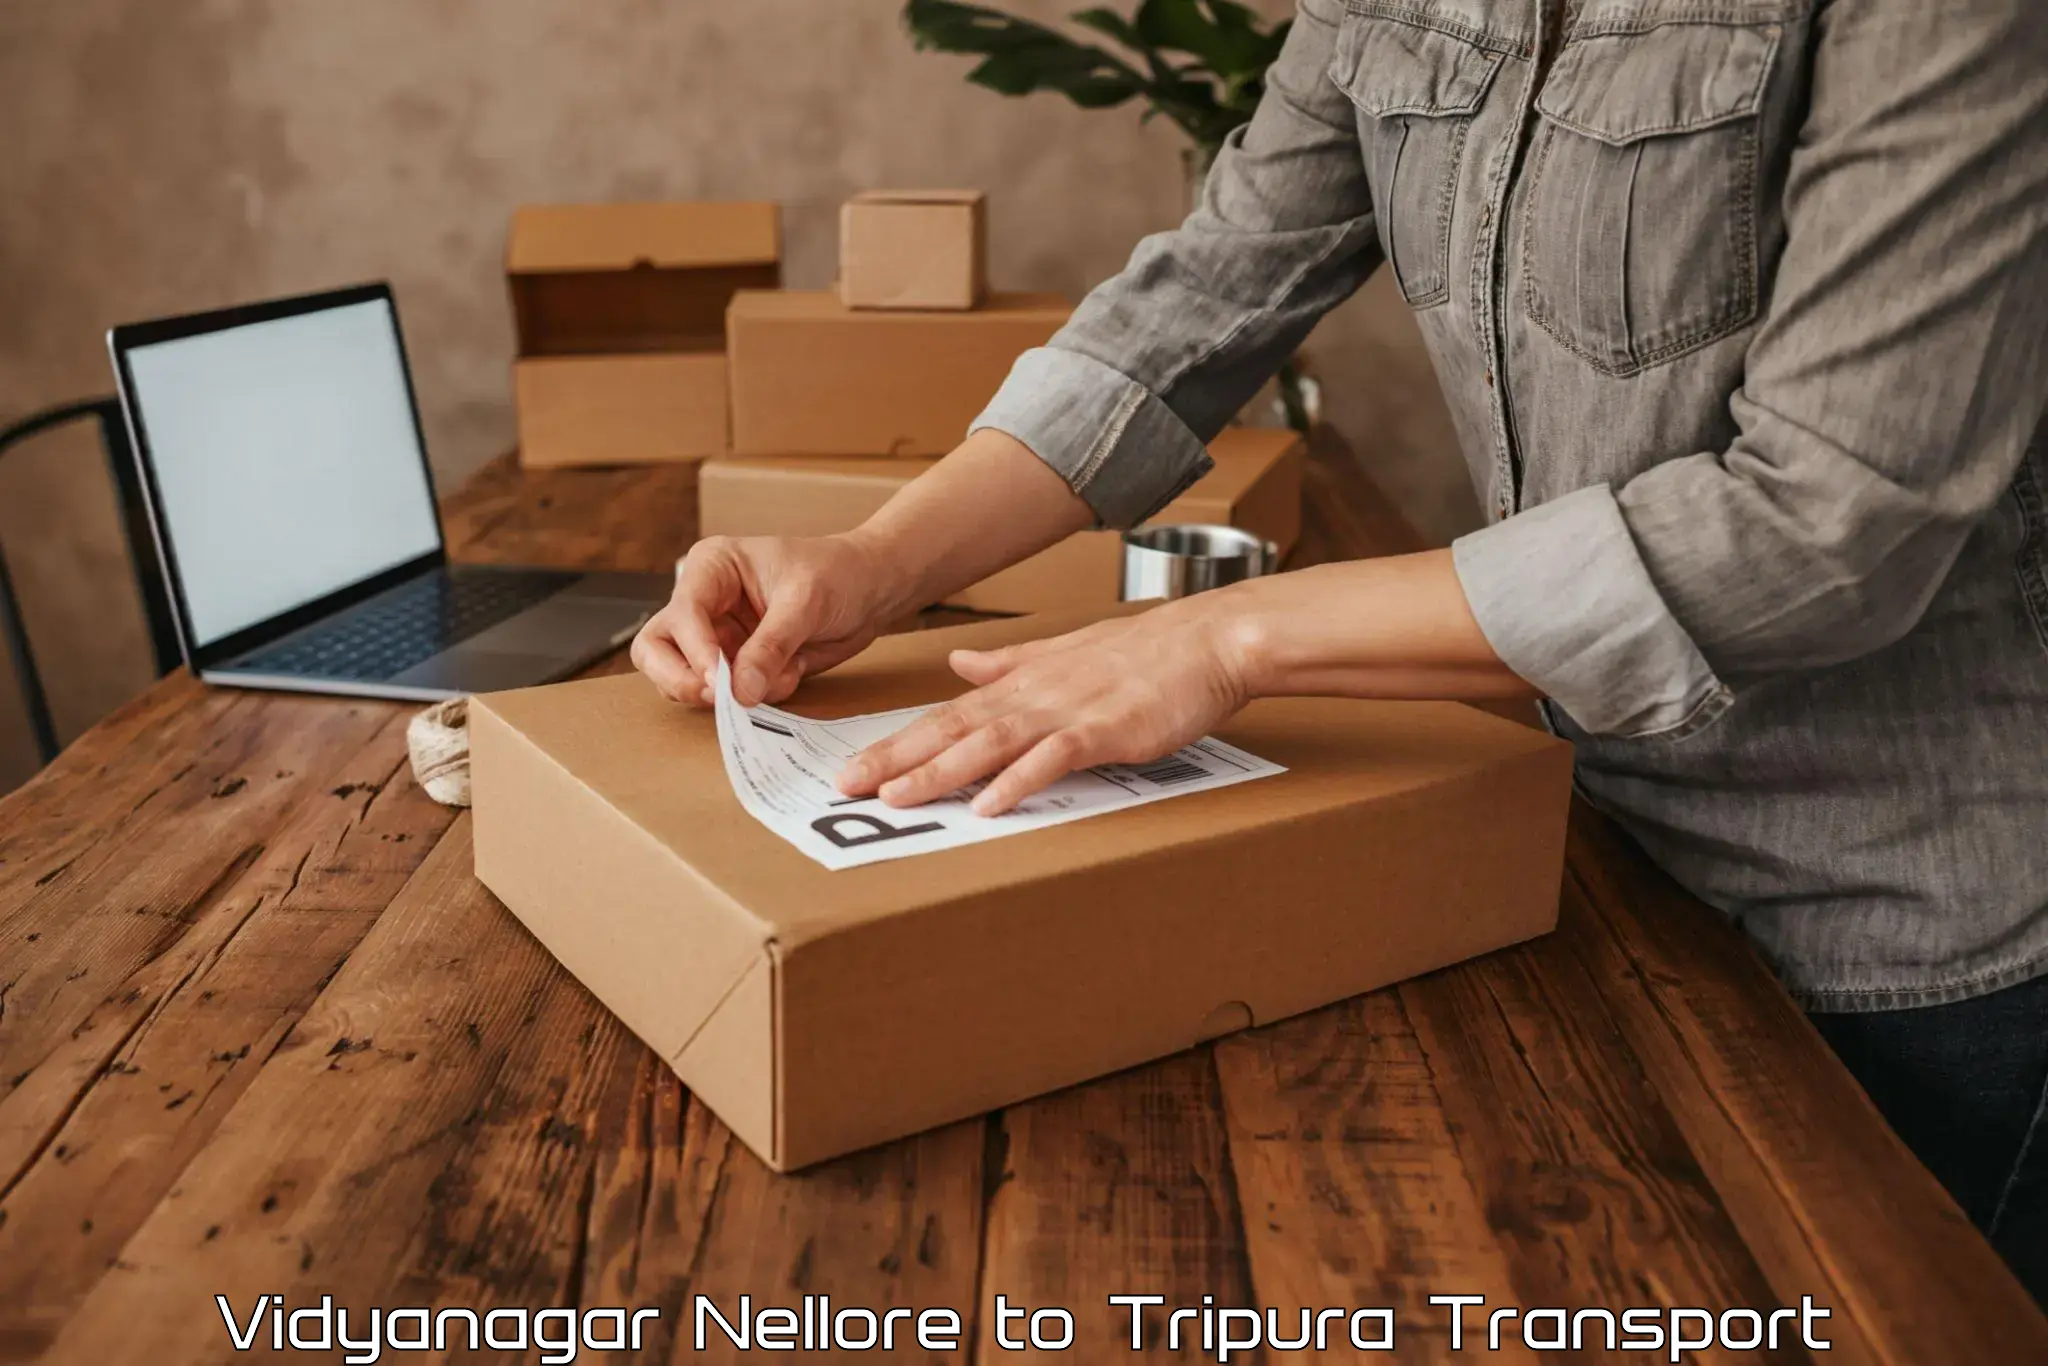 Package delivery services Vidyanagar Nellore to Aambasa